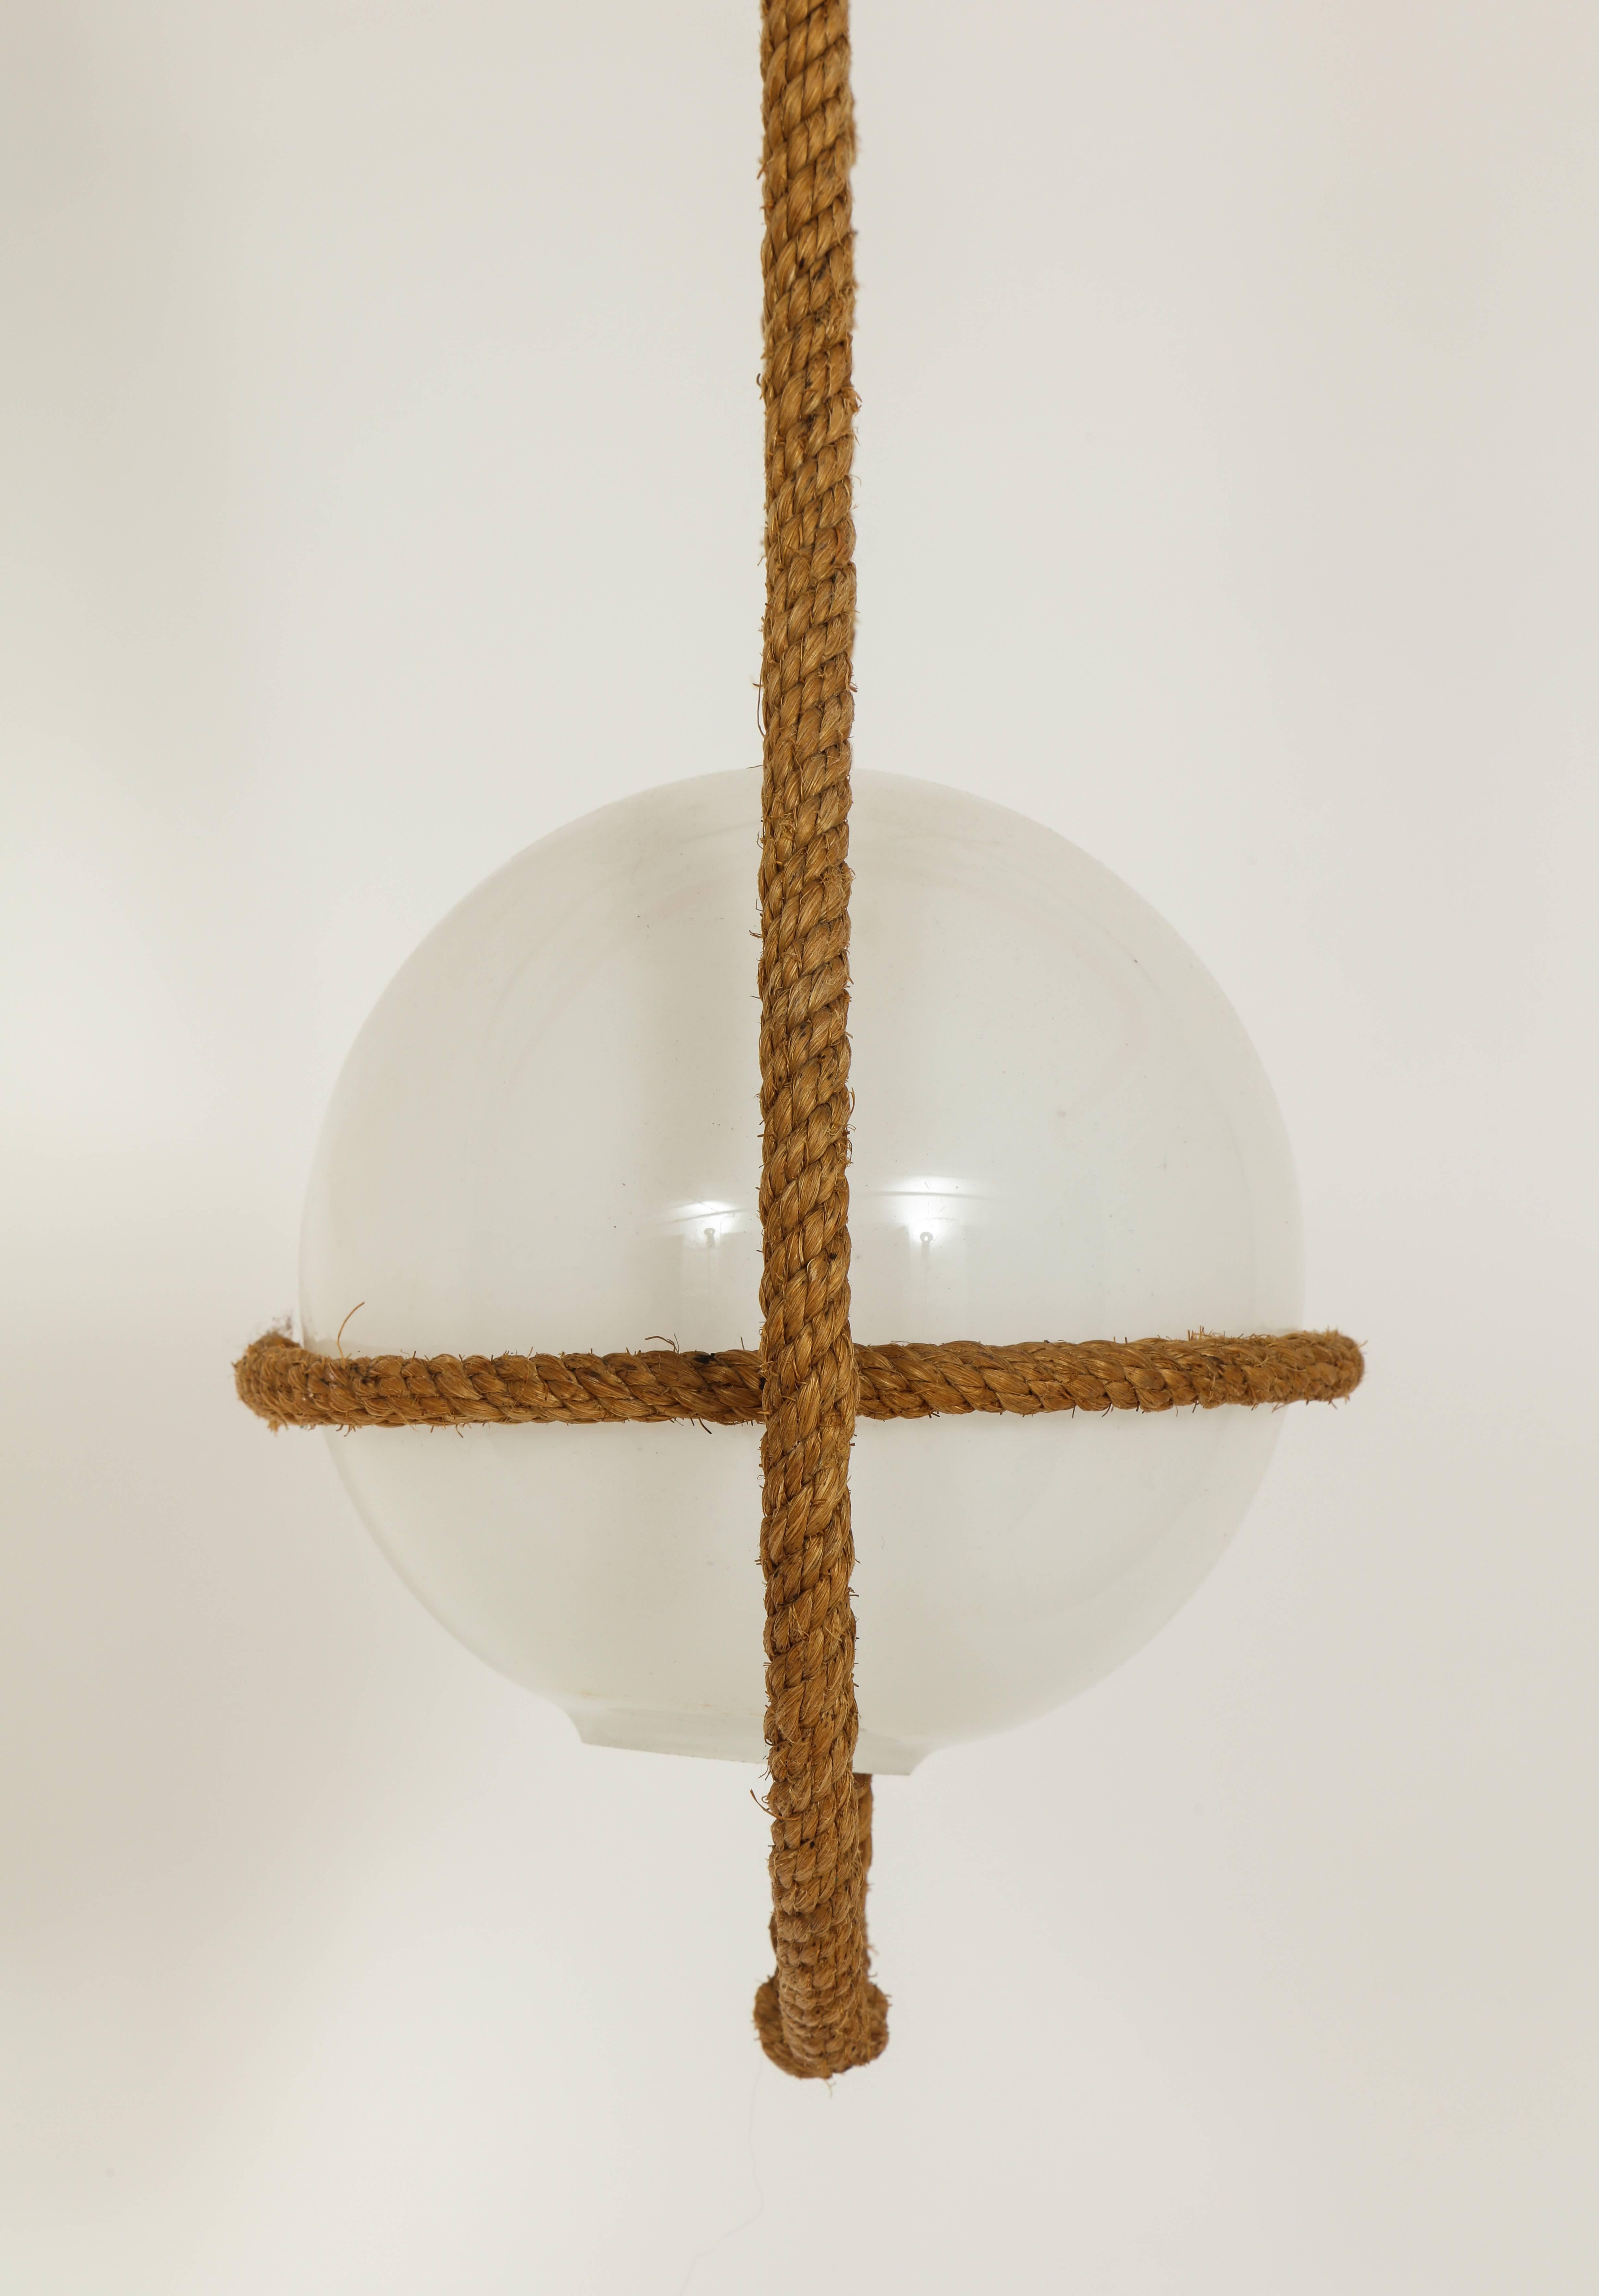 French Audoux Minet Hanging Cord Chandelier Light Mid-Century, France, 1950s